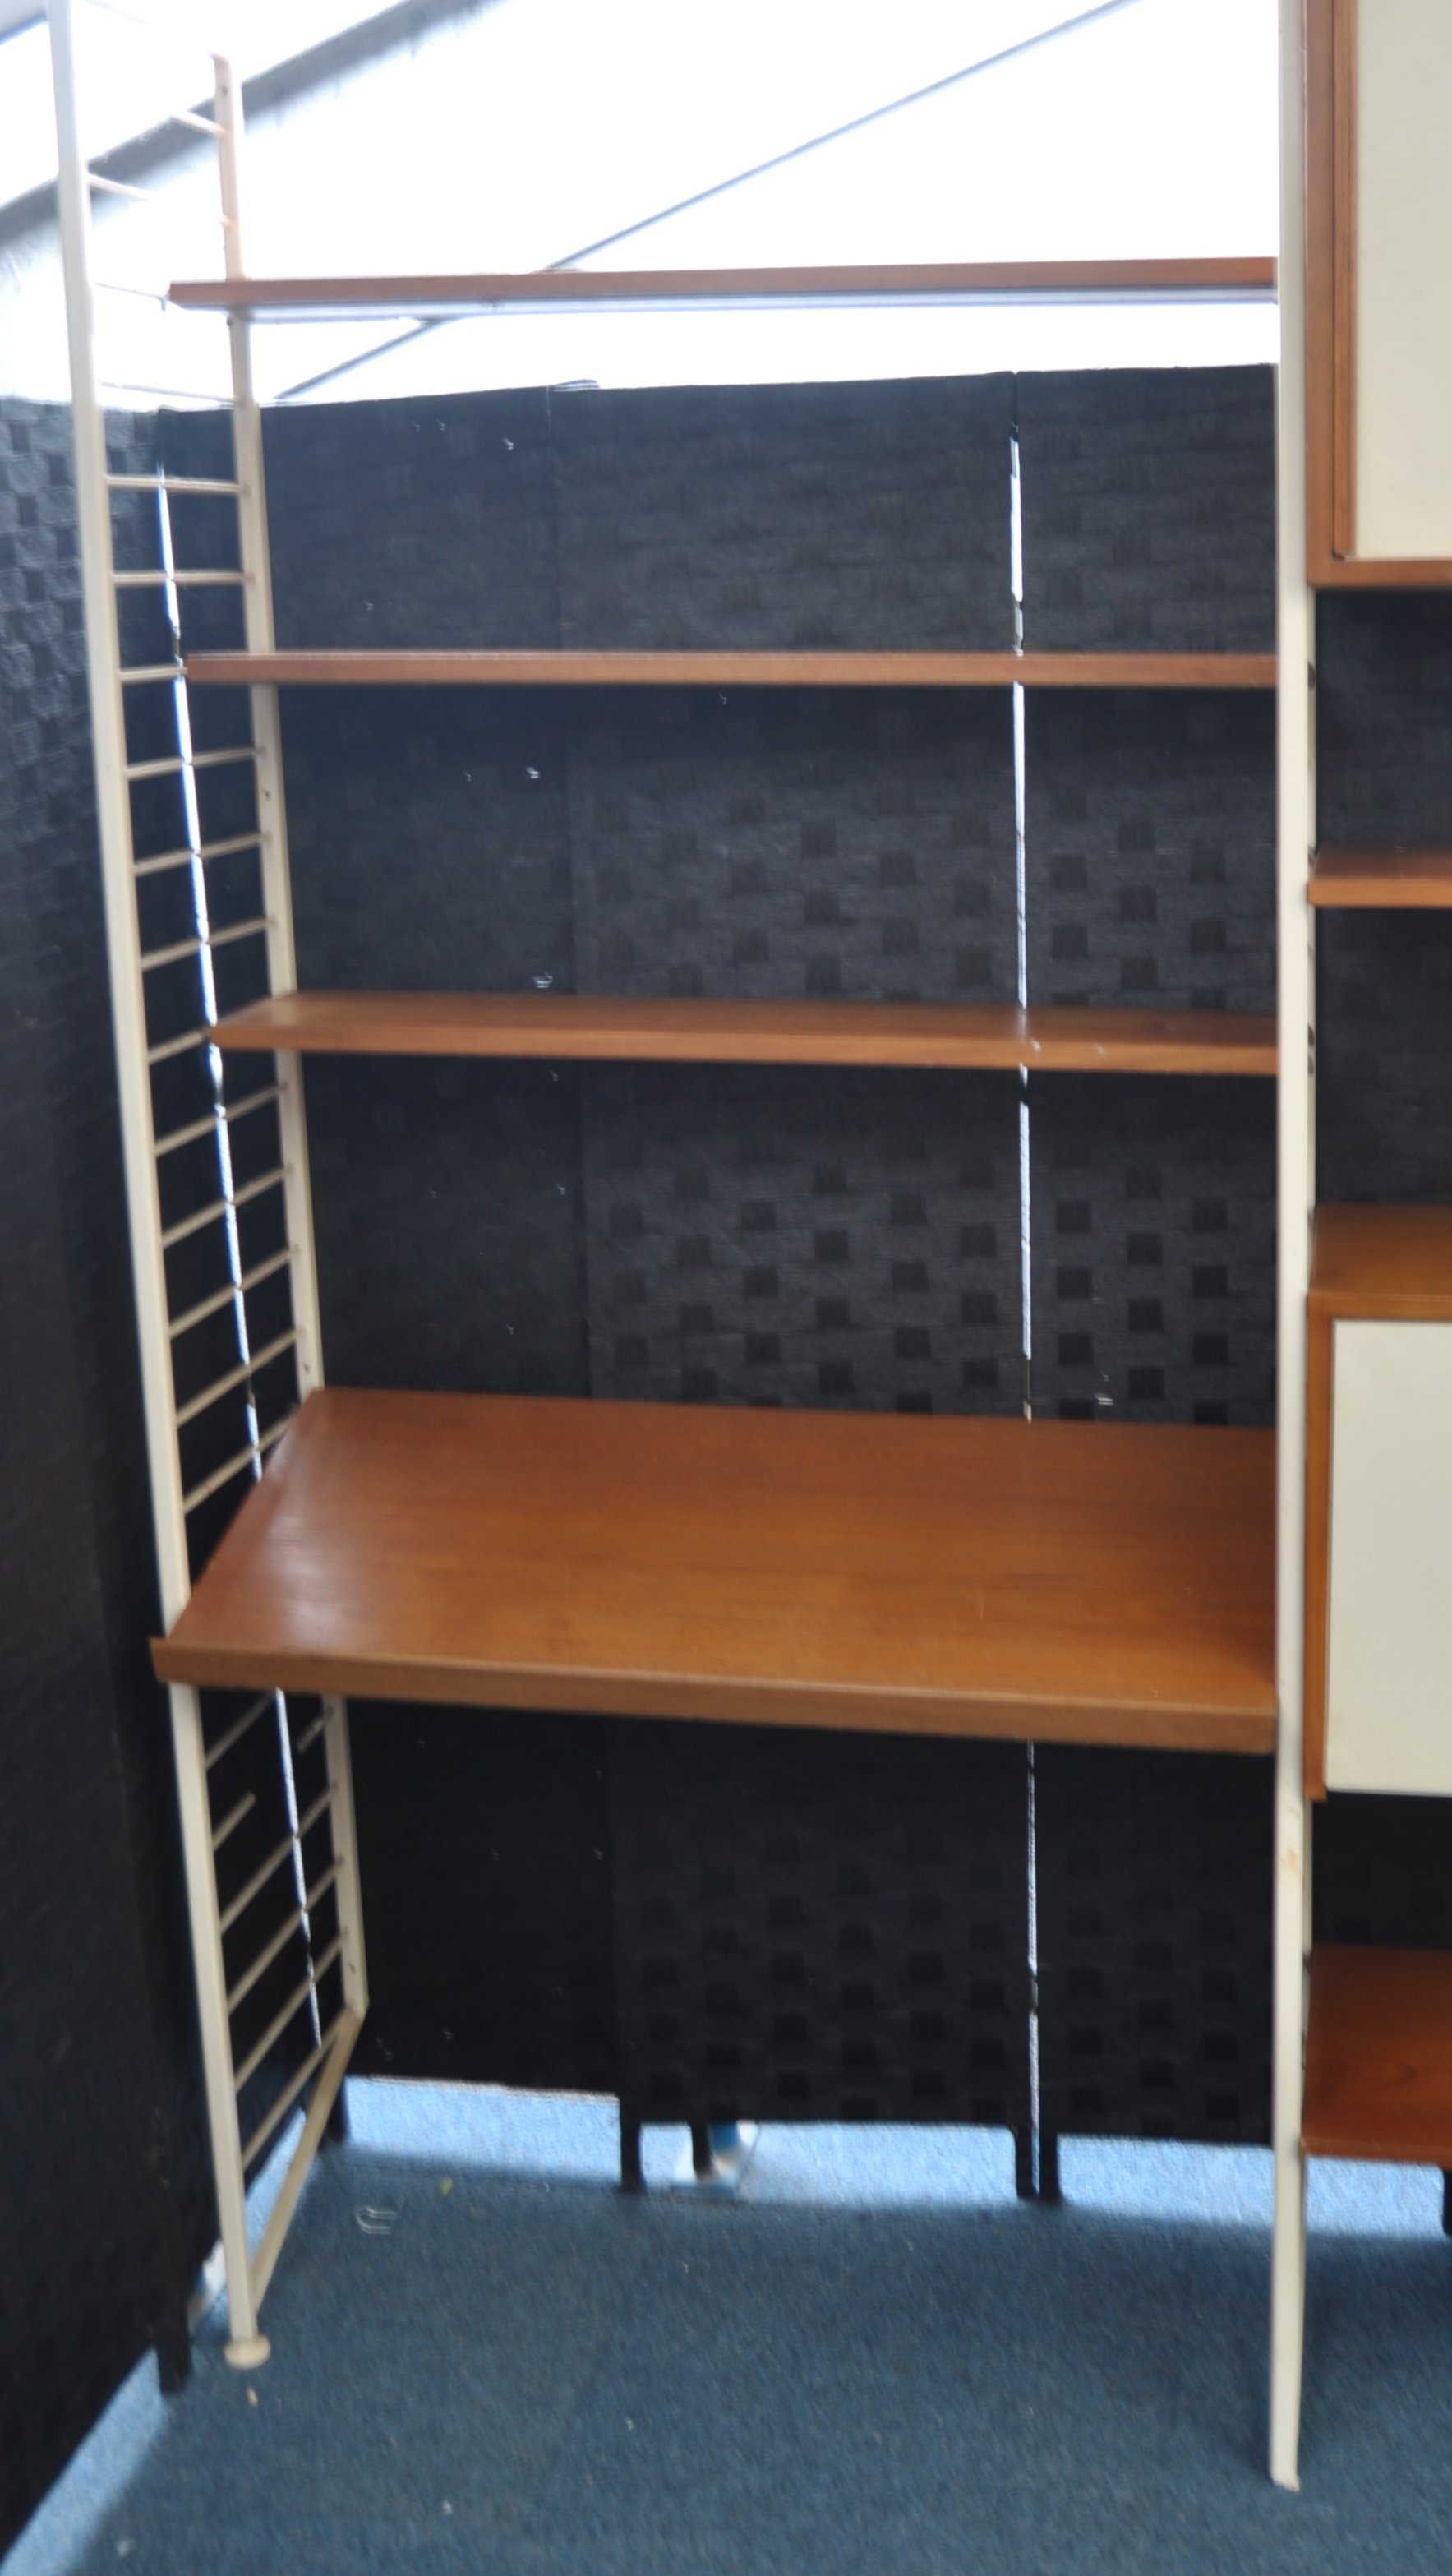 STAPLES LADDERAX VINTAGE MODULAR WALL UNIT BY ROBERT HEAL - Image 2 of 7